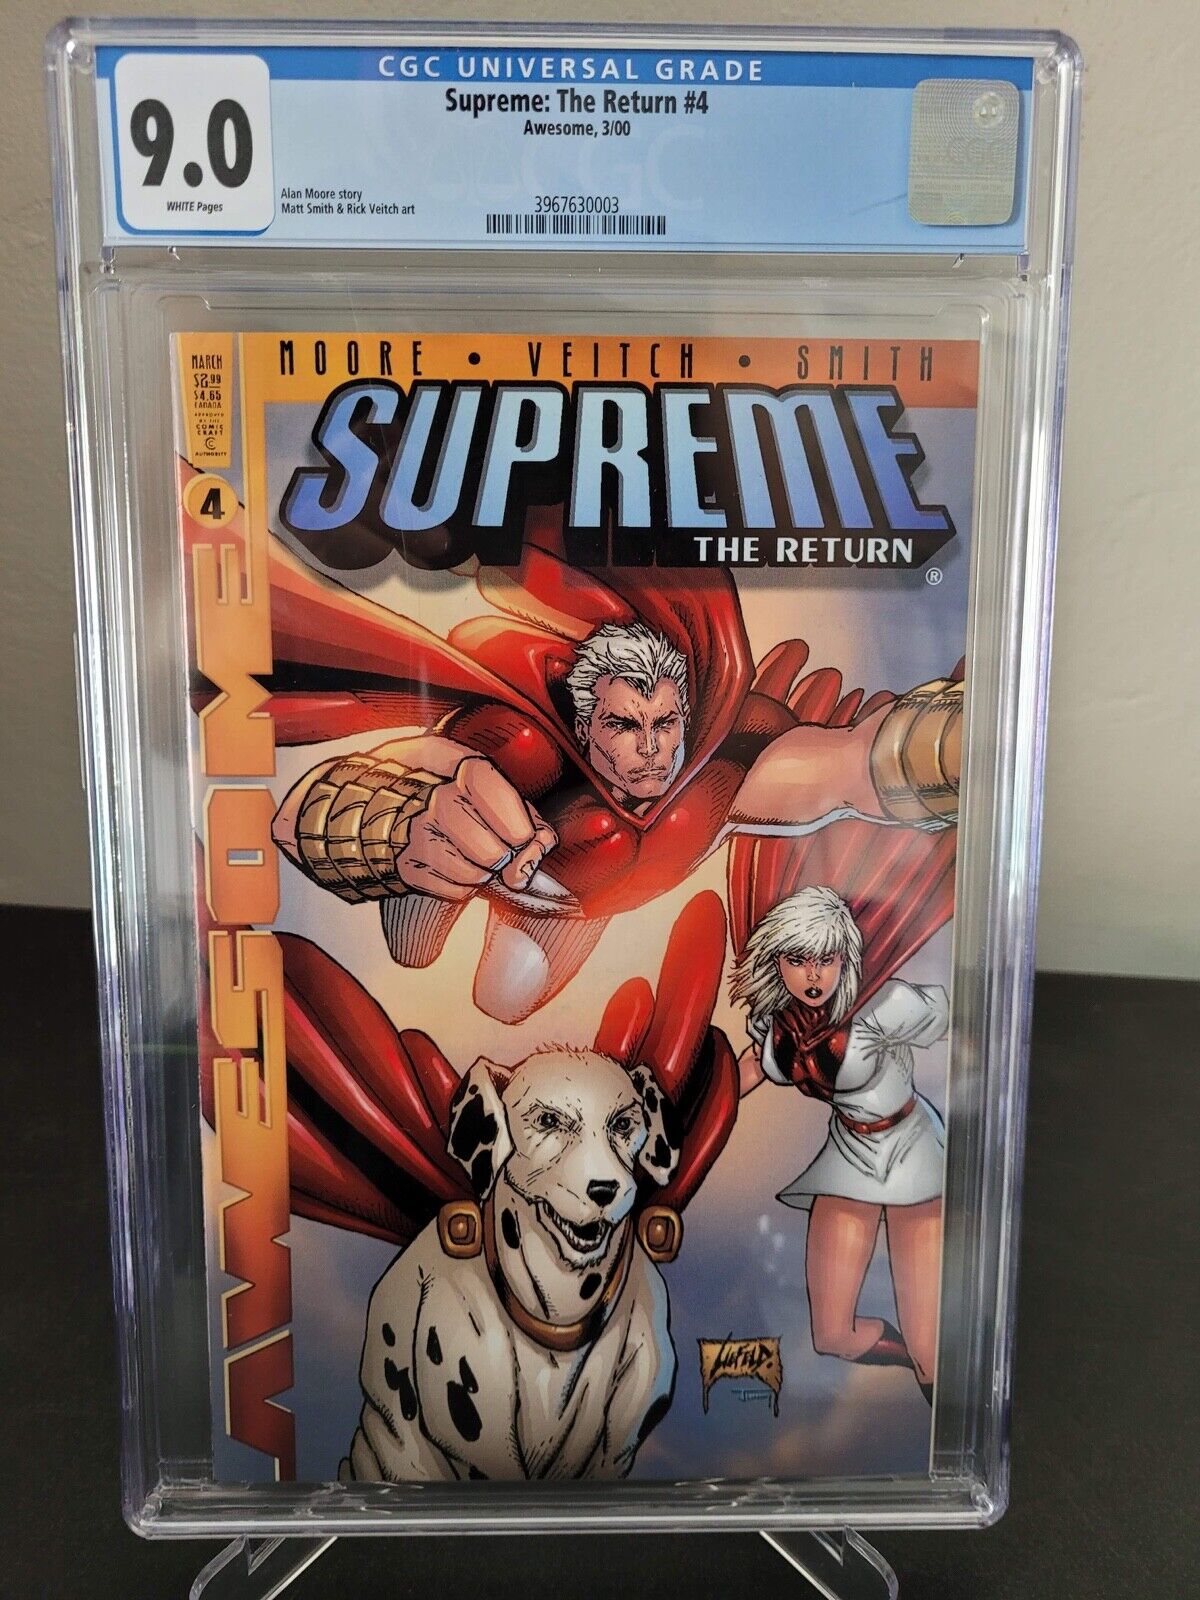 SUPREME THE RETURN #4 CGC 9.0 GRADED 2000 AWESOME COMICS ALAN MOORE LIEFELD COV